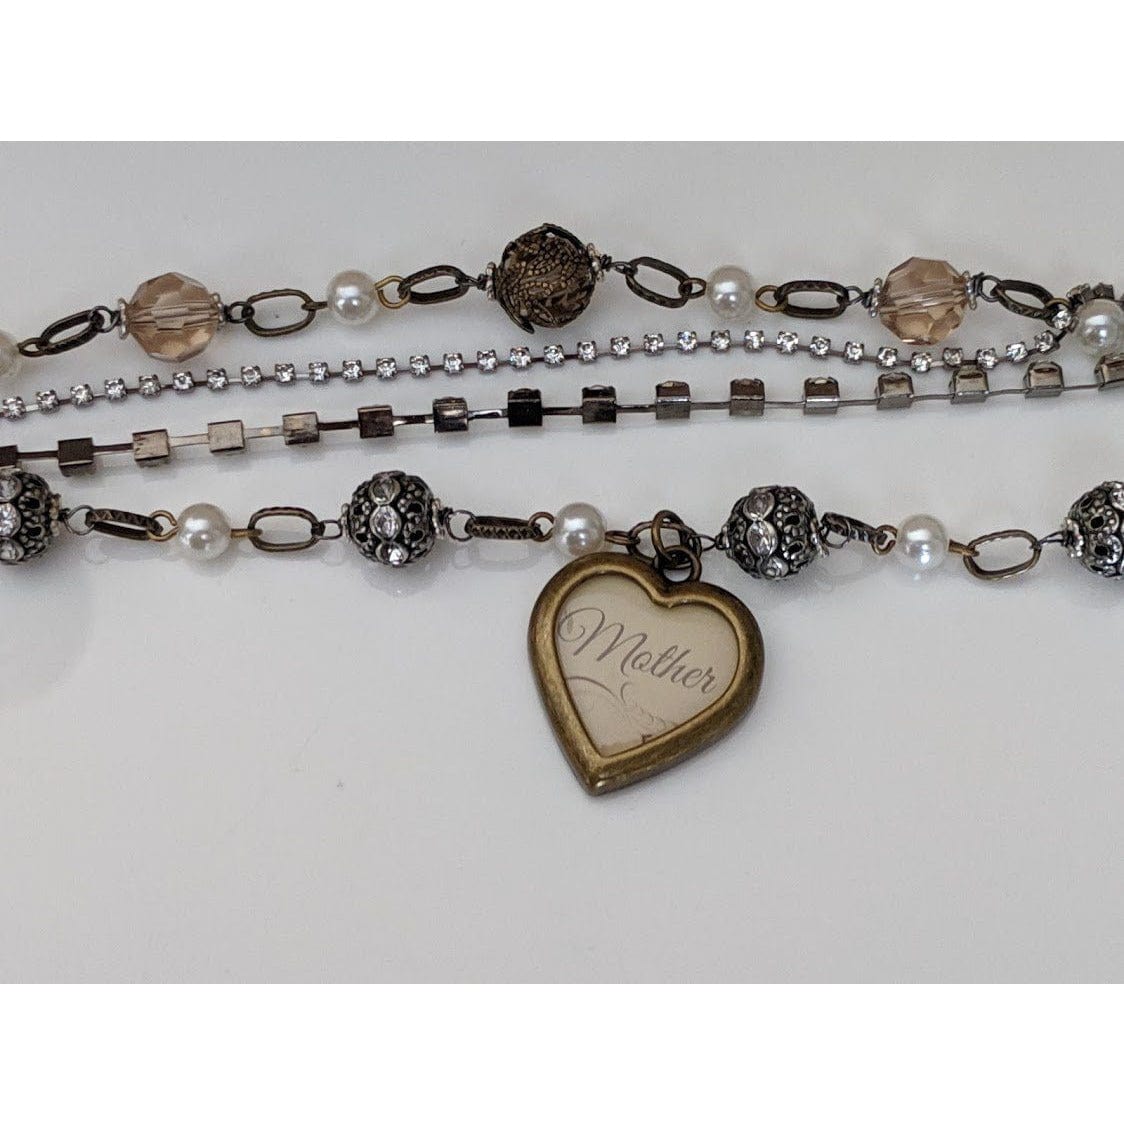 Hand Crafted, Layered Vintage look Bracelet for Moms-Beautiful Gift by Guilded Life - The Pink Pigs, A Compassionate Boutique